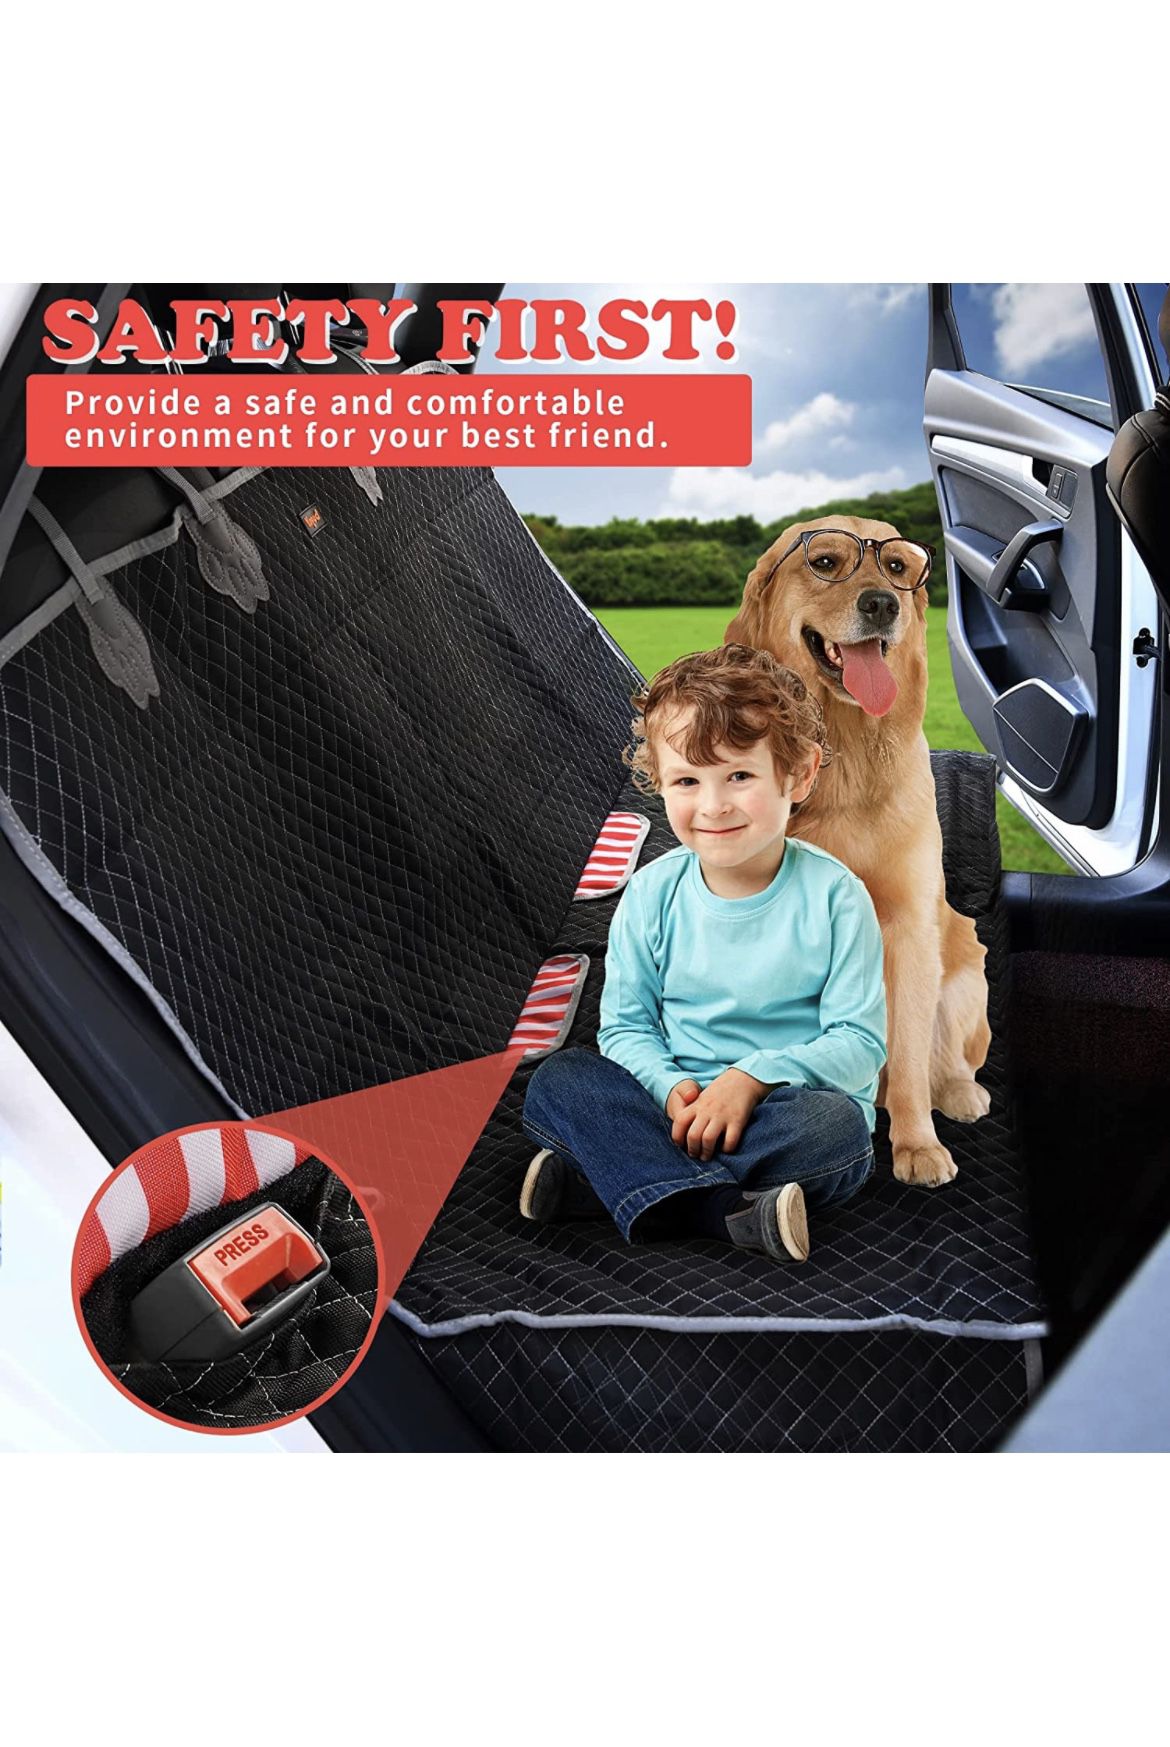 Dog Car Seat Cover Protector, Yagud Pet Hammock for Cars with Waterproof, Scratchproof and Nonslip Material, Washable & Quilted Pet Bench Cover for Ca